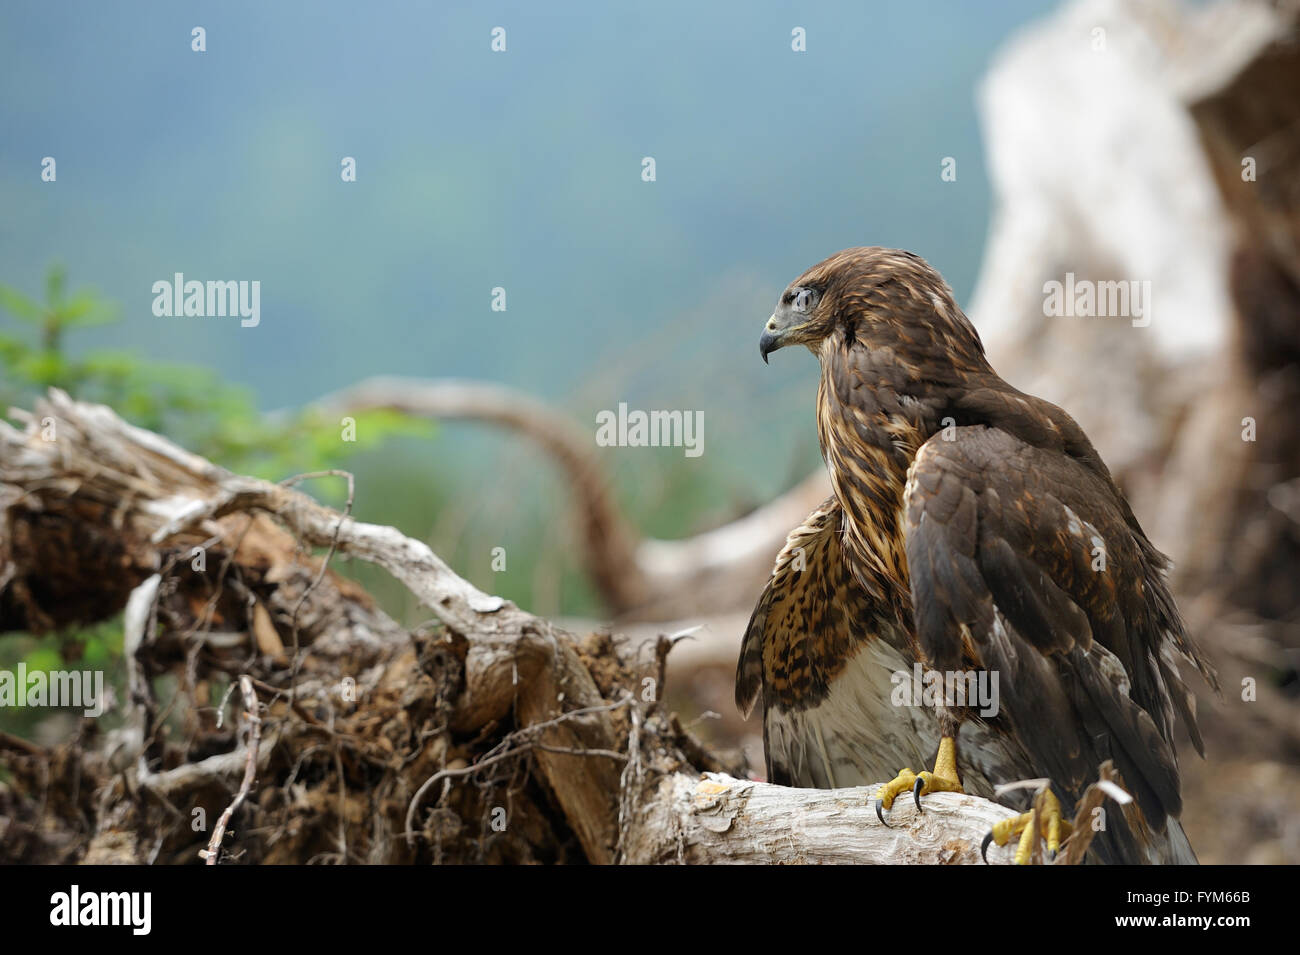 Hawk on a branch in forest Stock Photo